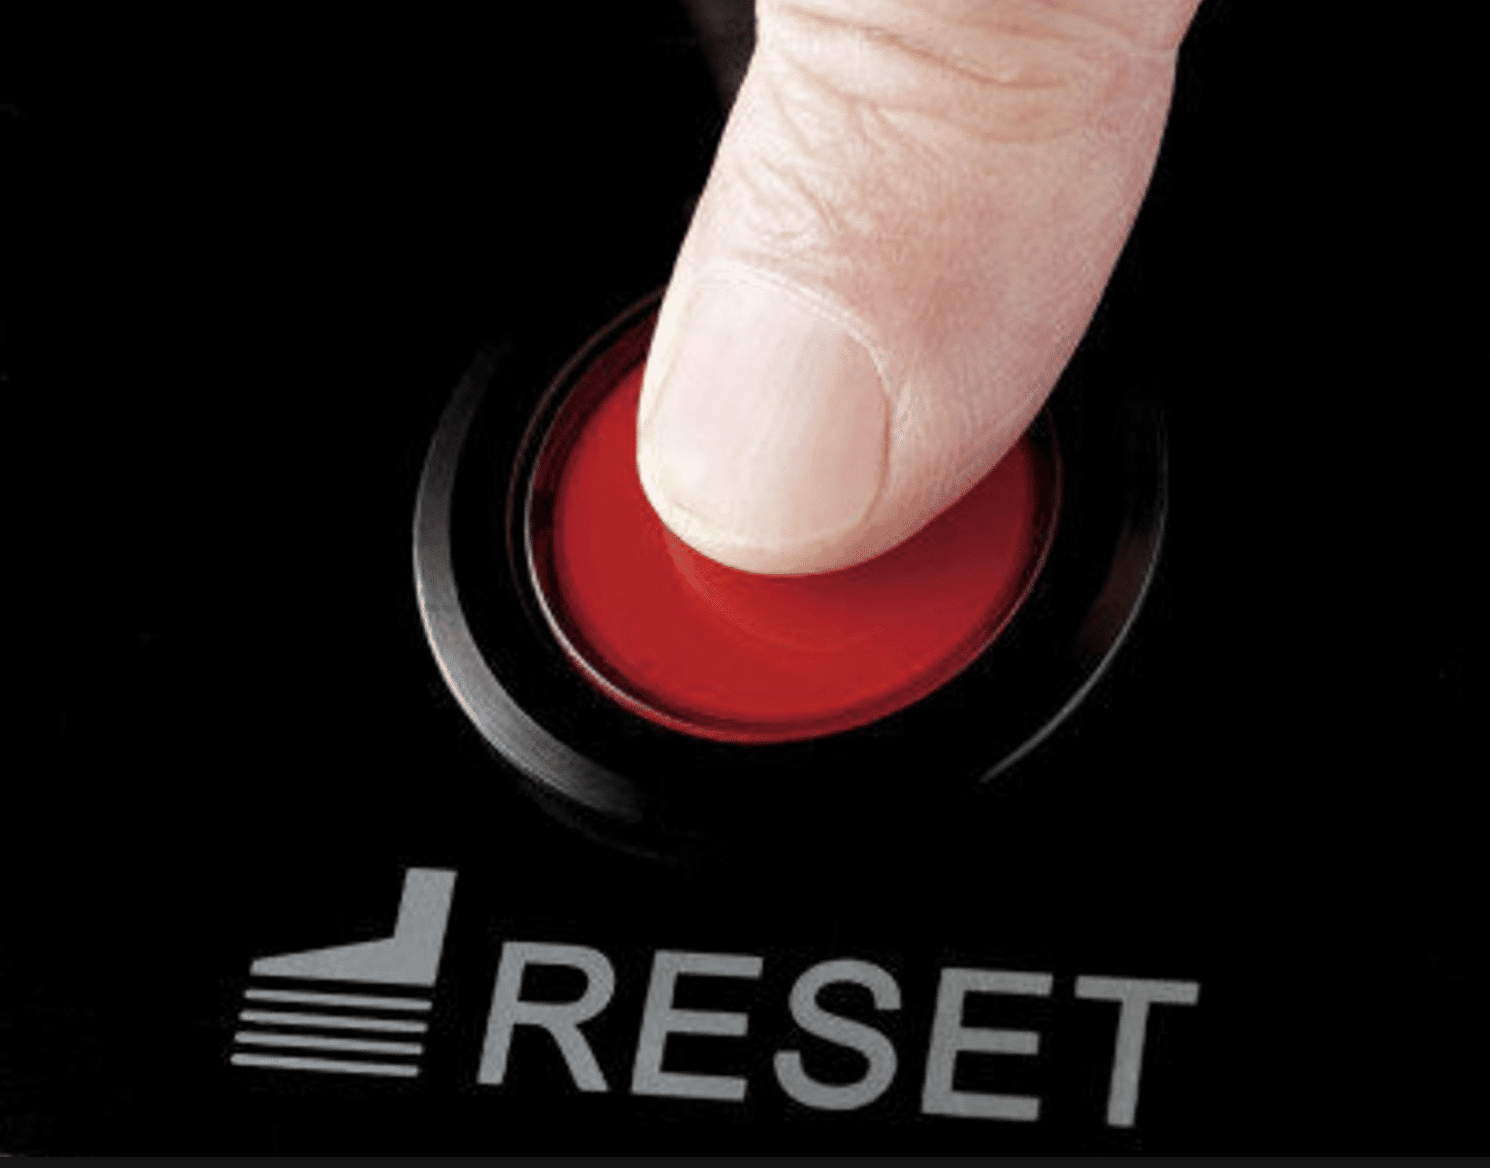 A finger touching a bright red button labeled 'Reset'